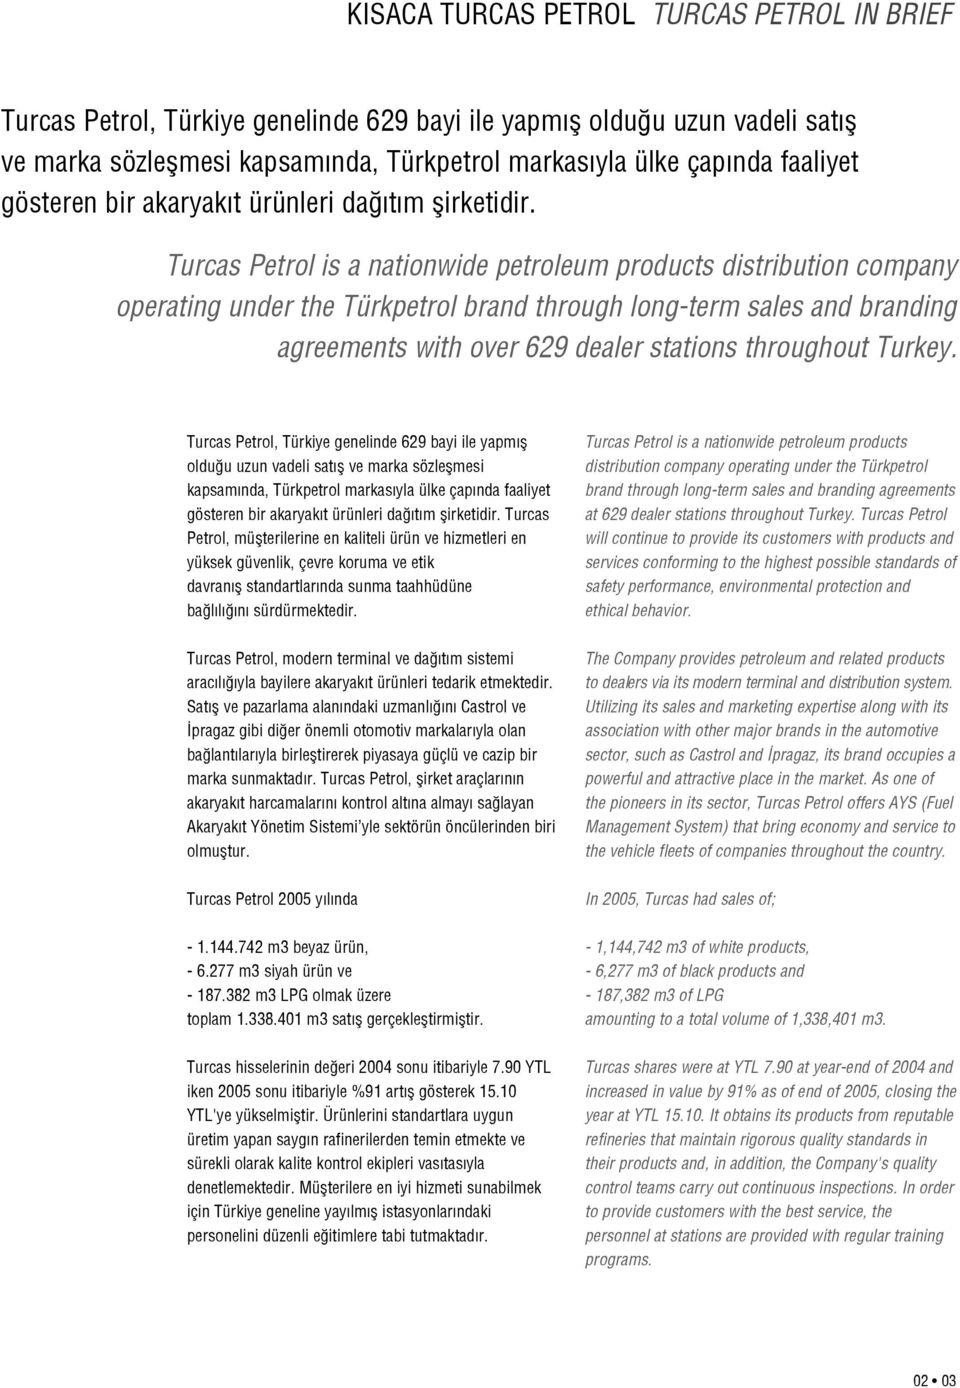 Turcas Petrol is a nationwide petroleum products distribution company operating under the Türkpetrol brand through long-term sales and branding agreements with over 629 dealer stations throughout